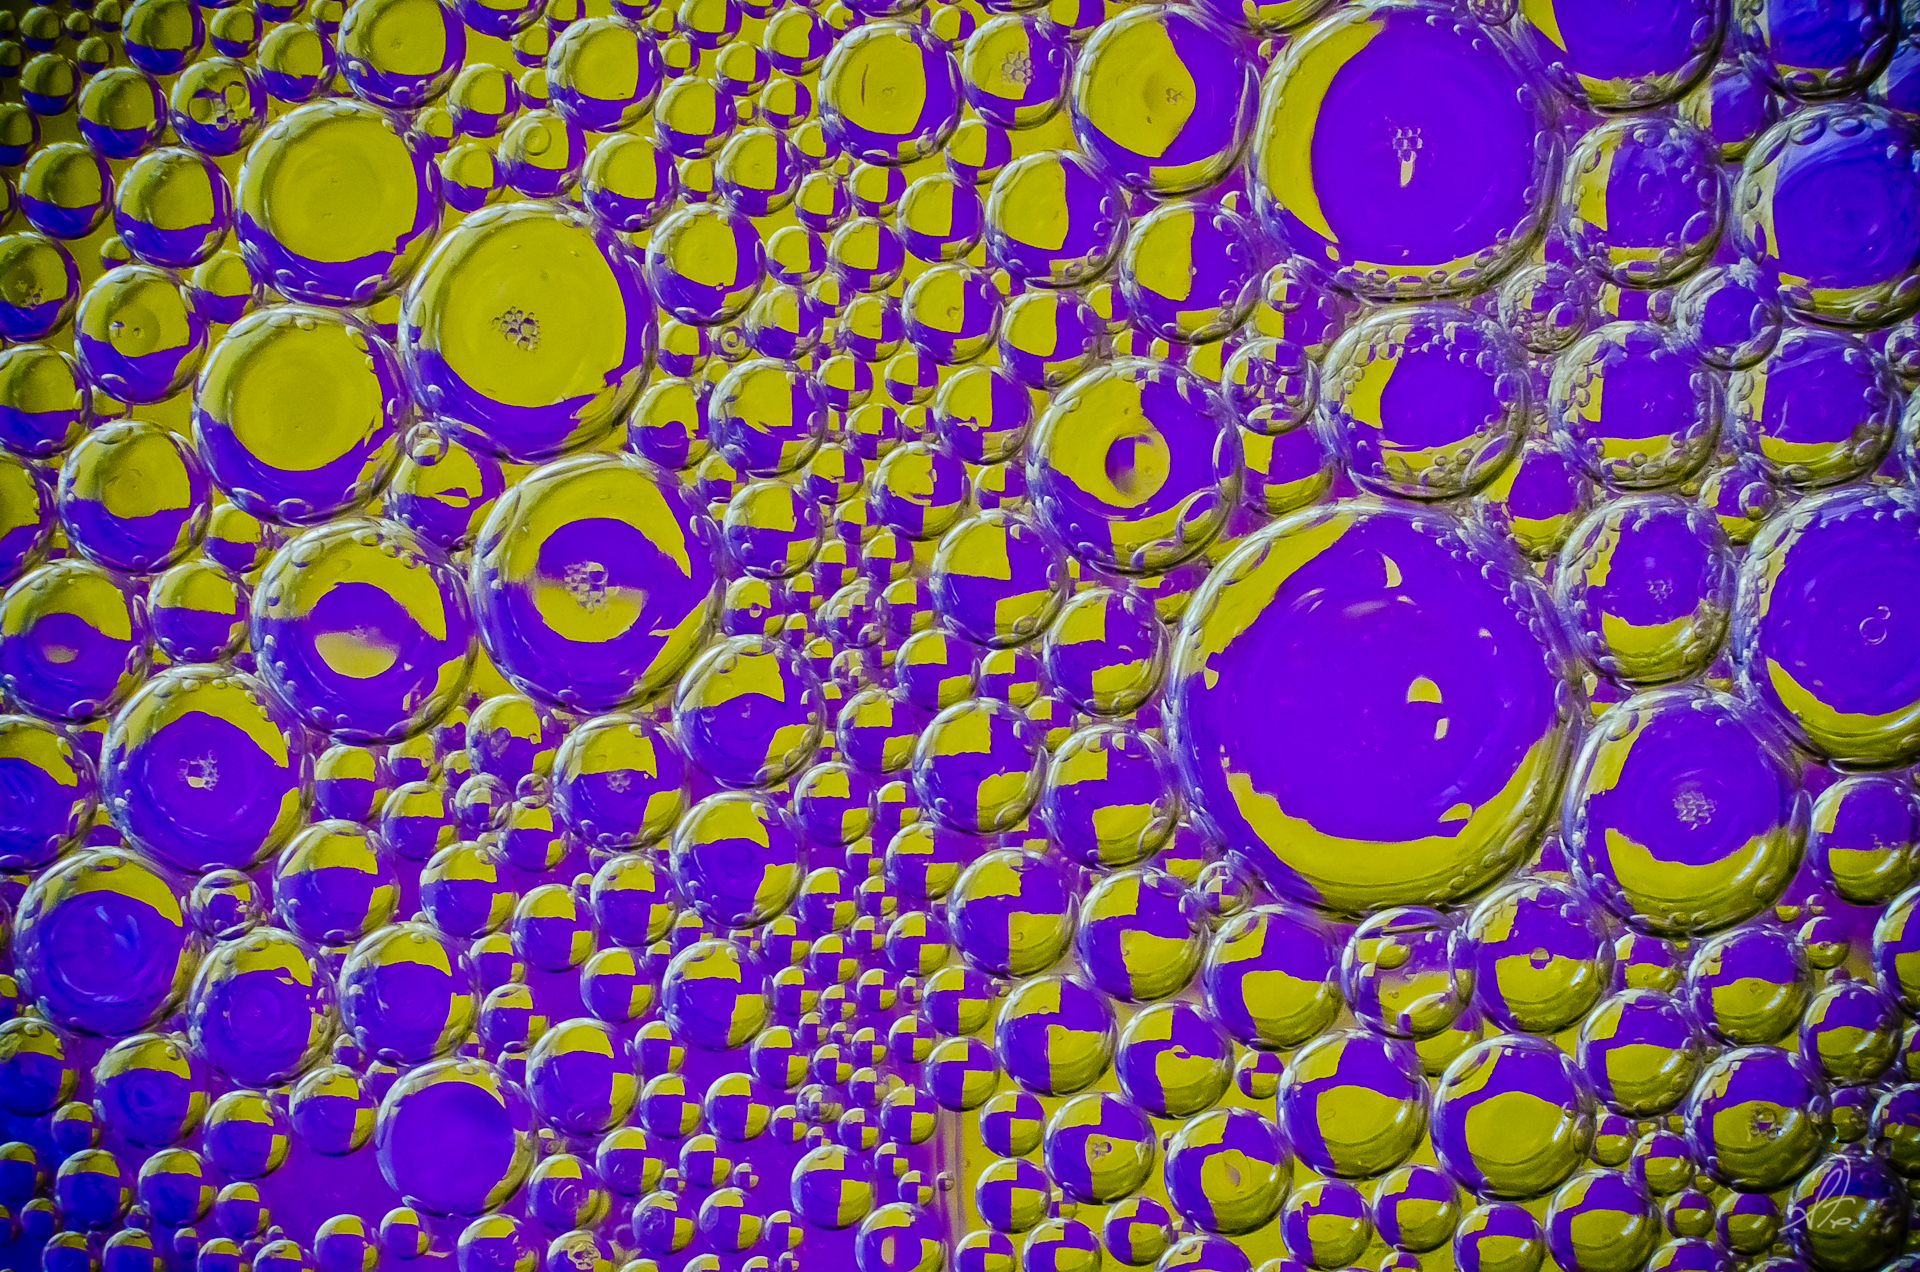 Project 365 [Day 243] Oil and Water in Purple and Yellow. Oil and Water in Purple and Yellow. This is a simple oil and water mixture with some yellow and purple paper under a clear bowl, shot with a macro extension tube setup and a 50mm Nikkor f/1.4 lens.